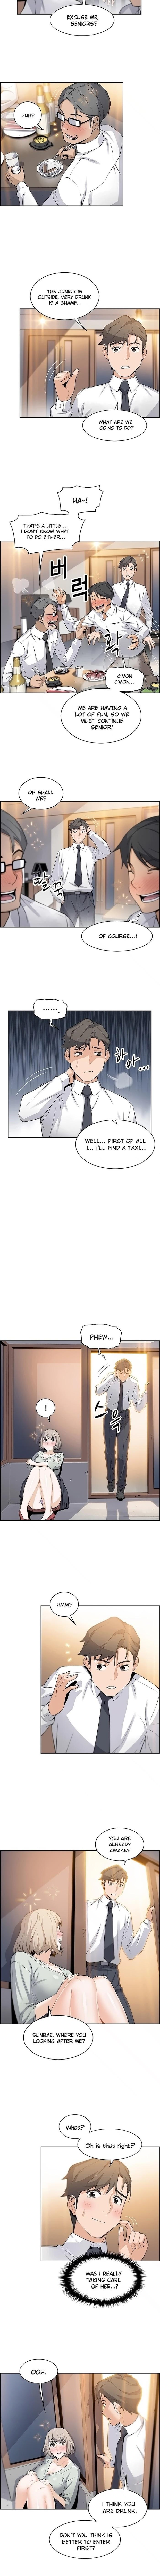 Housekeeper [Neck Pillow, Paper] Ch.49/49 [English] [Manhwa PDF] Completed 162